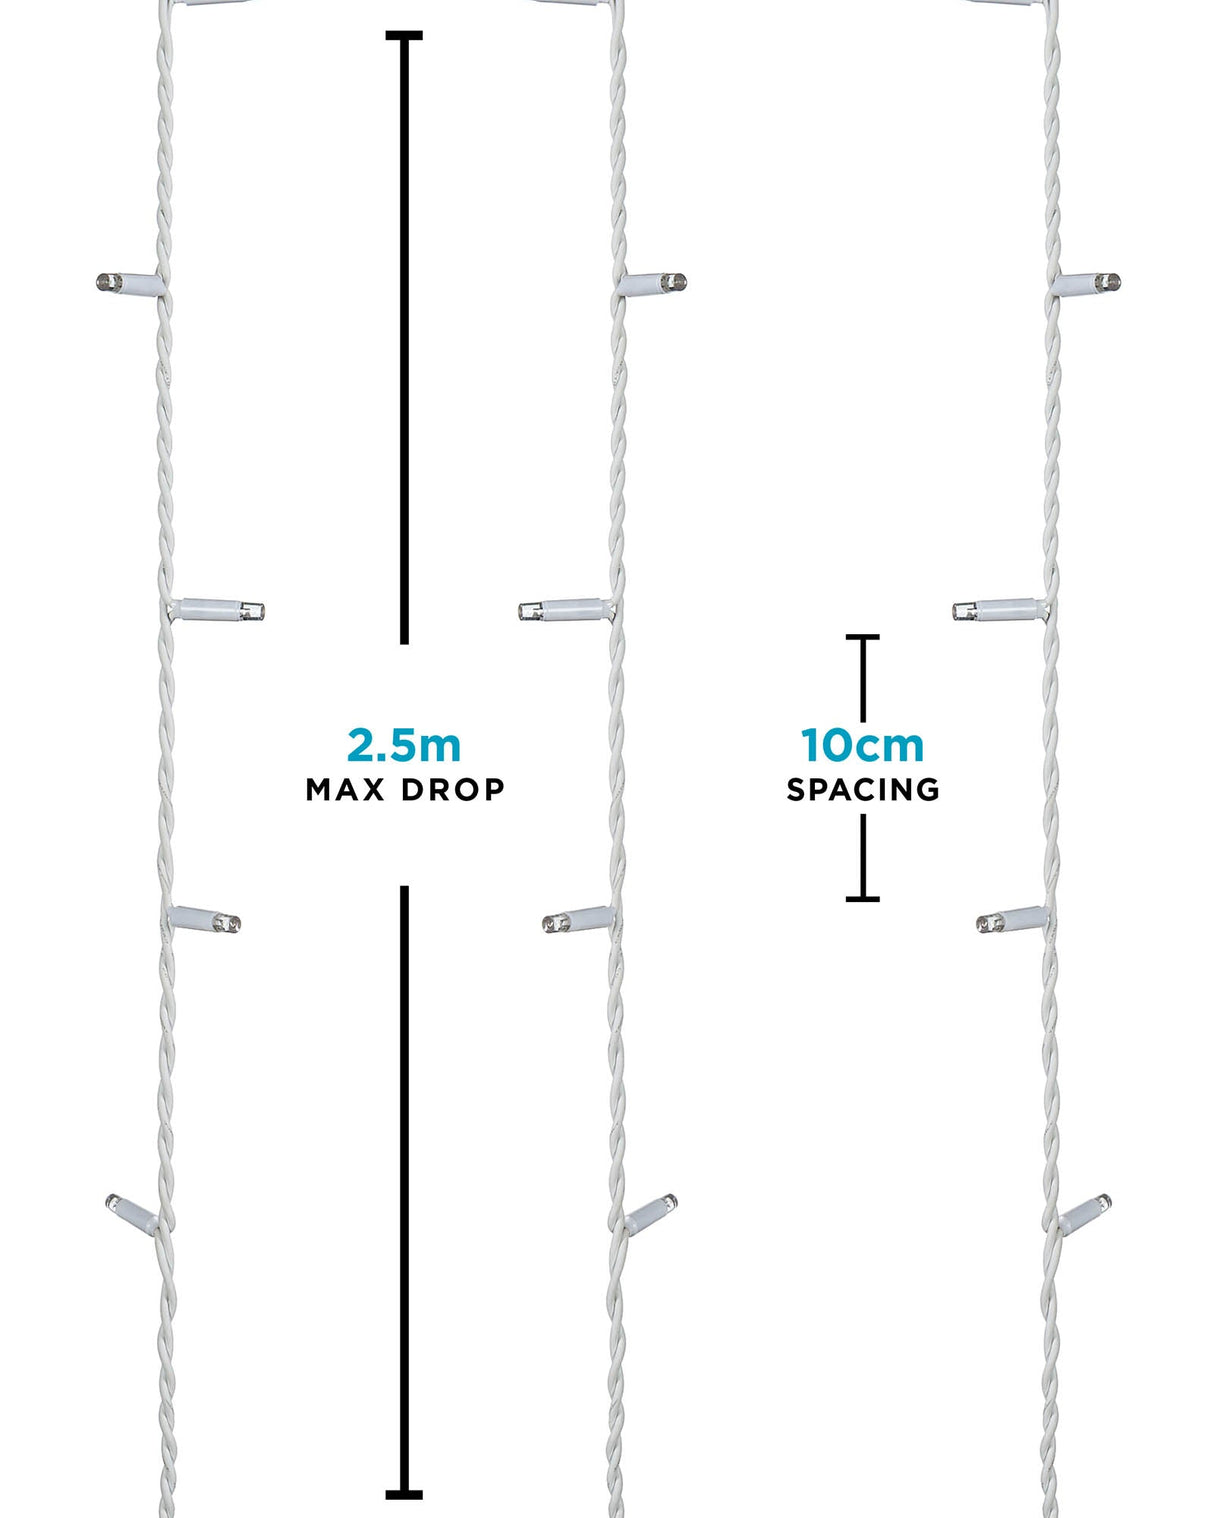 LINK PRO LED Curtain Lights, White Cable, 2.5 m Drop, Warm White / White